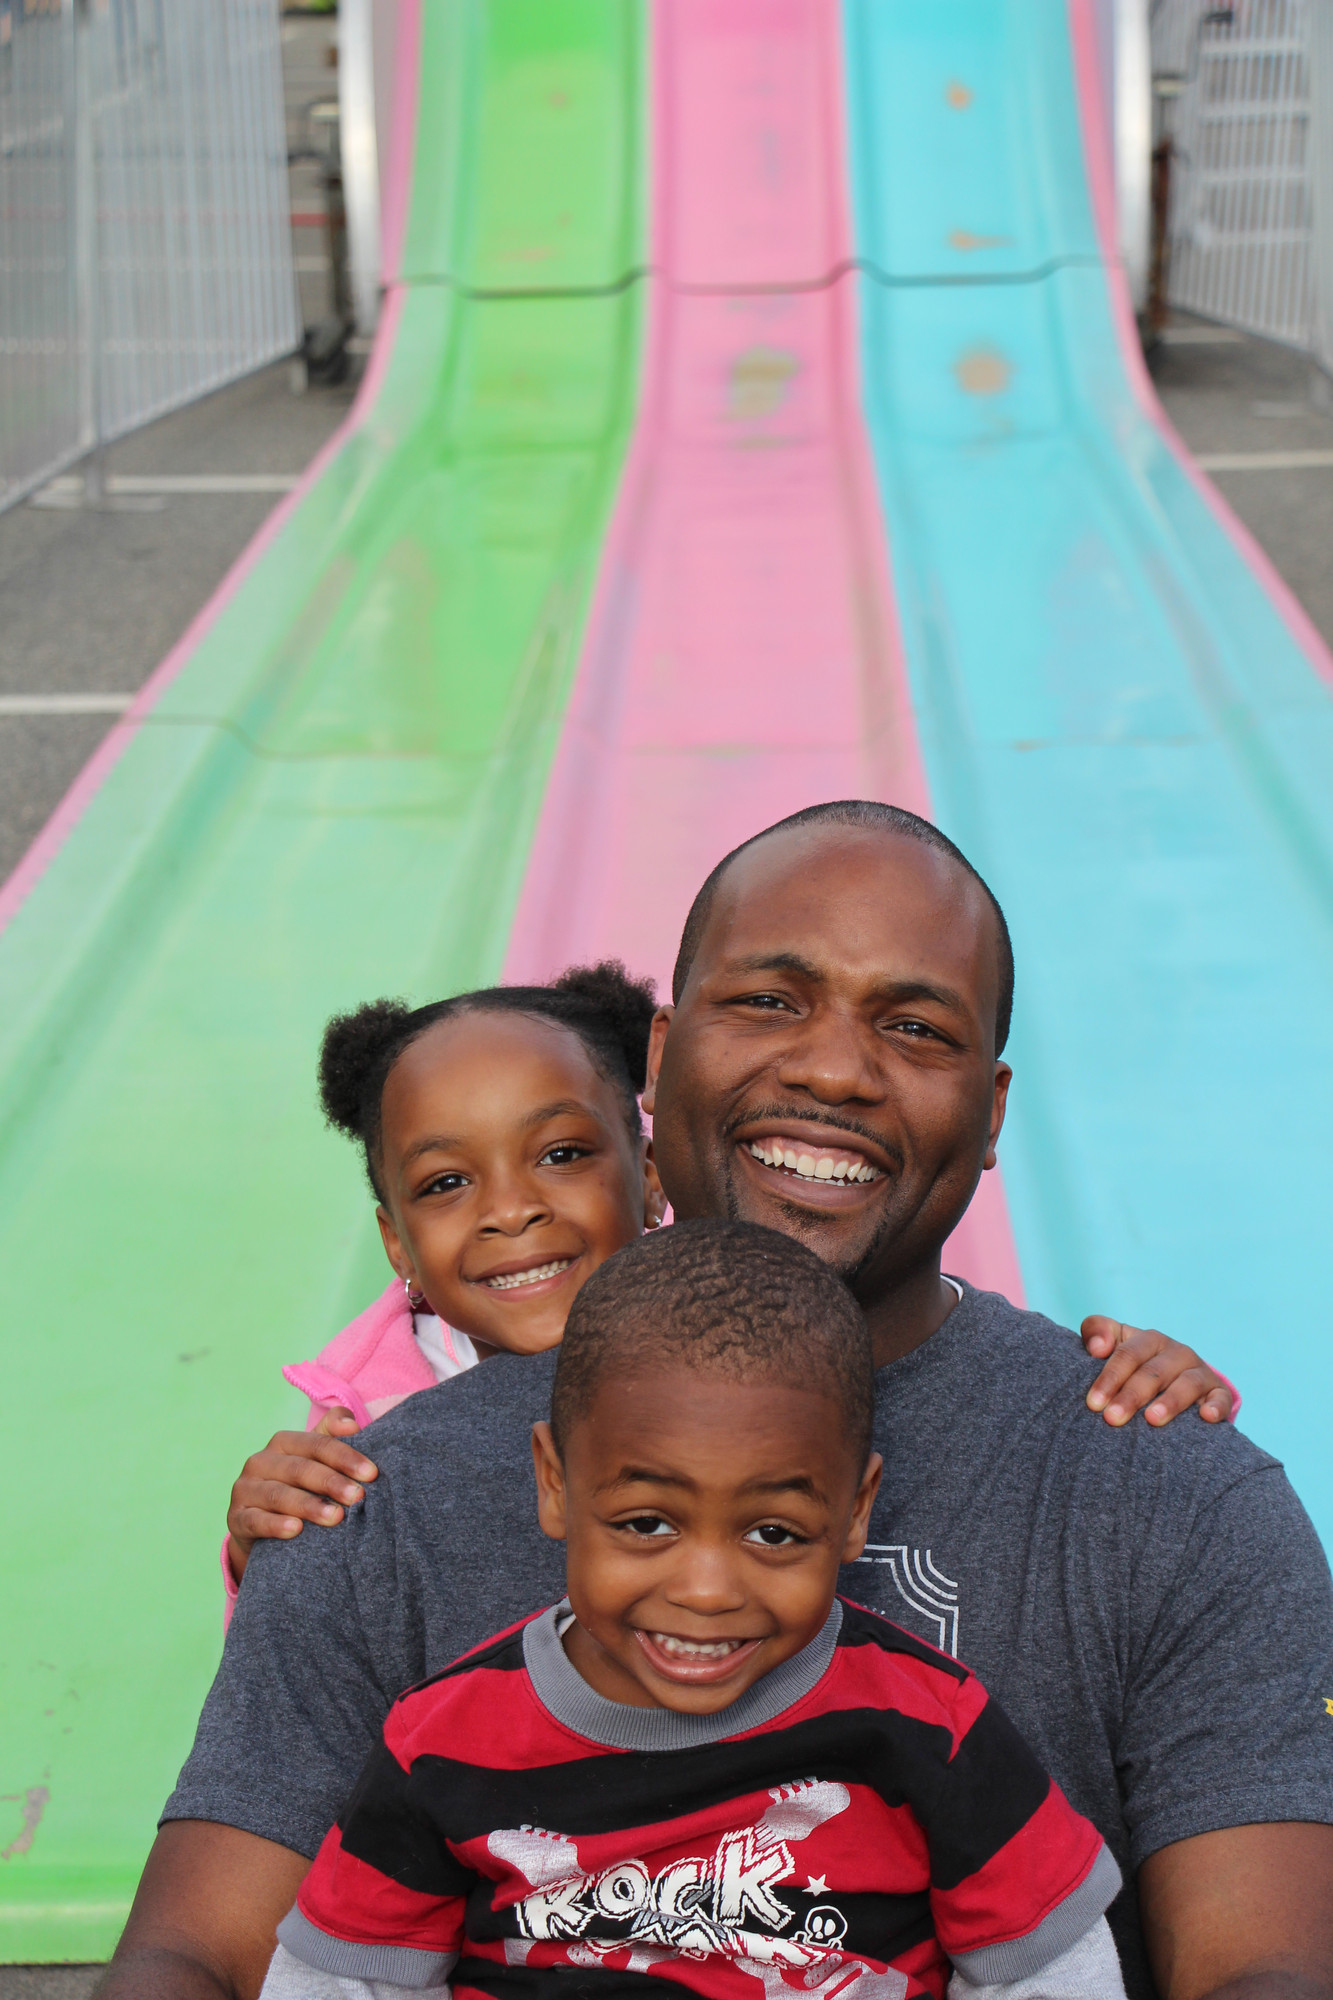 Ibrahim Jackson went down the slide with his two kids,  Morgan, 5, and Jared, 3, at the Baldwin Chamber of Commerce carnival, which took place May 29 ­— June 1 at the Long Island Rail Road station.